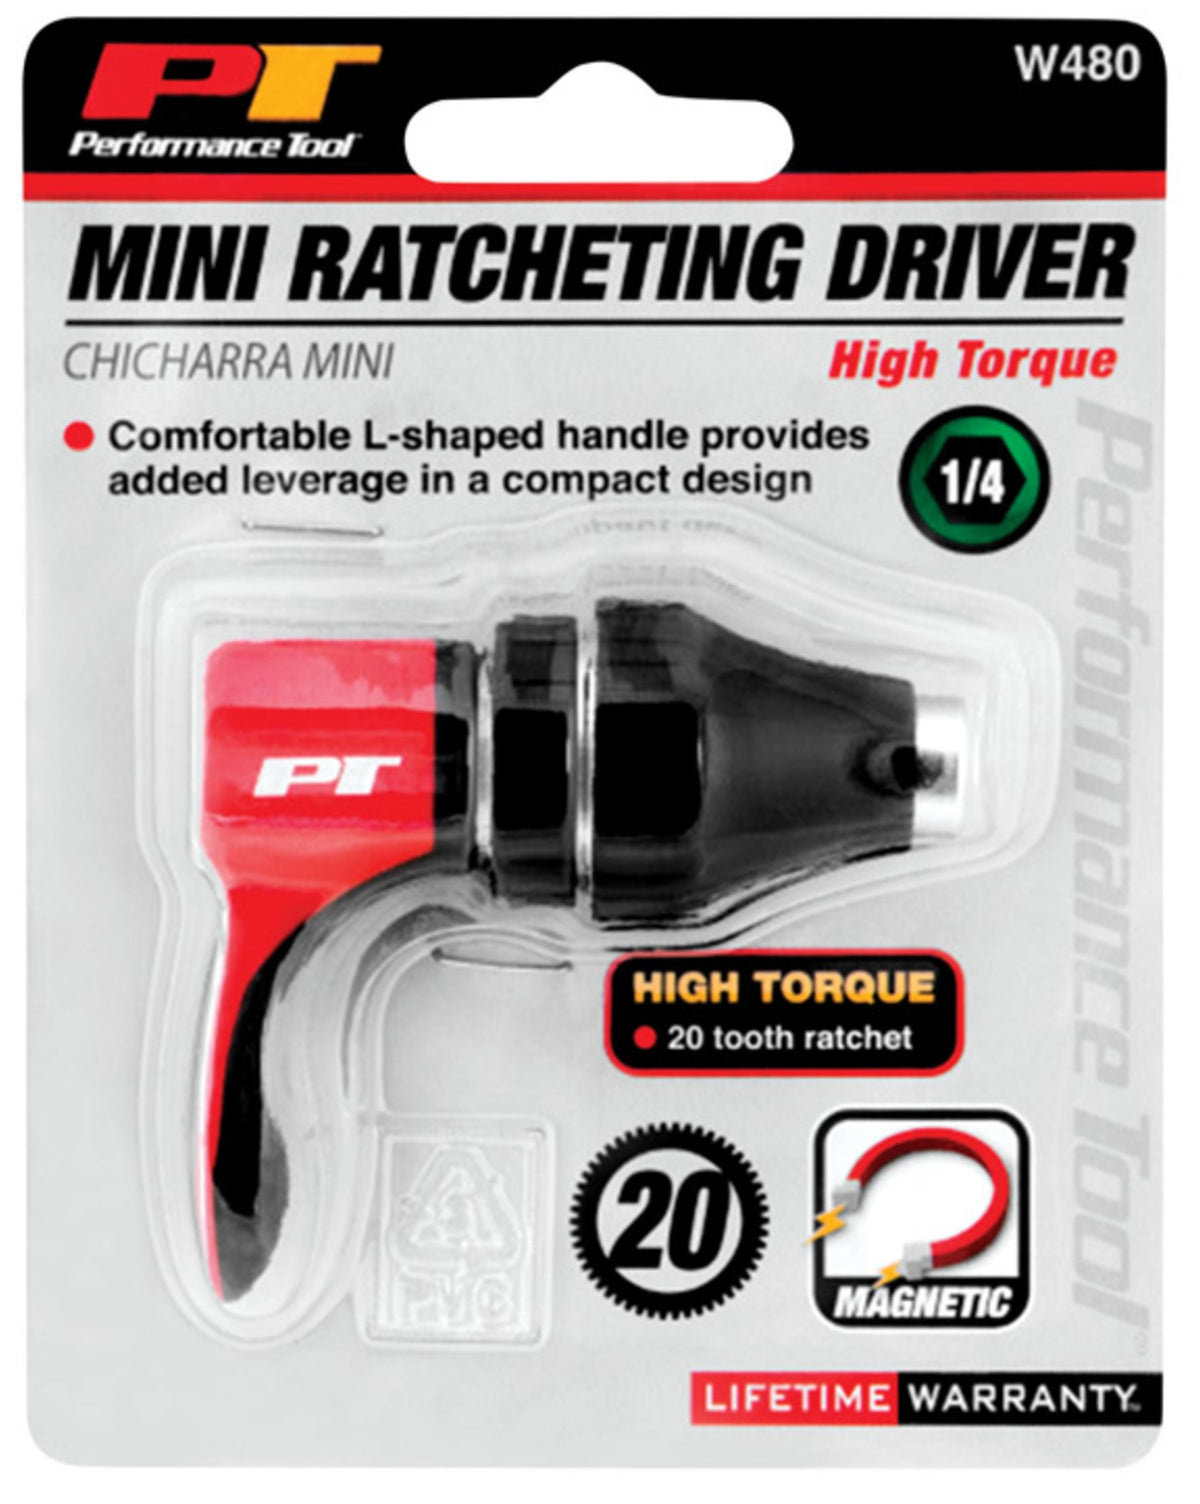 Performance Tool W480 High Torque Ratcheting Driver, Black/Red